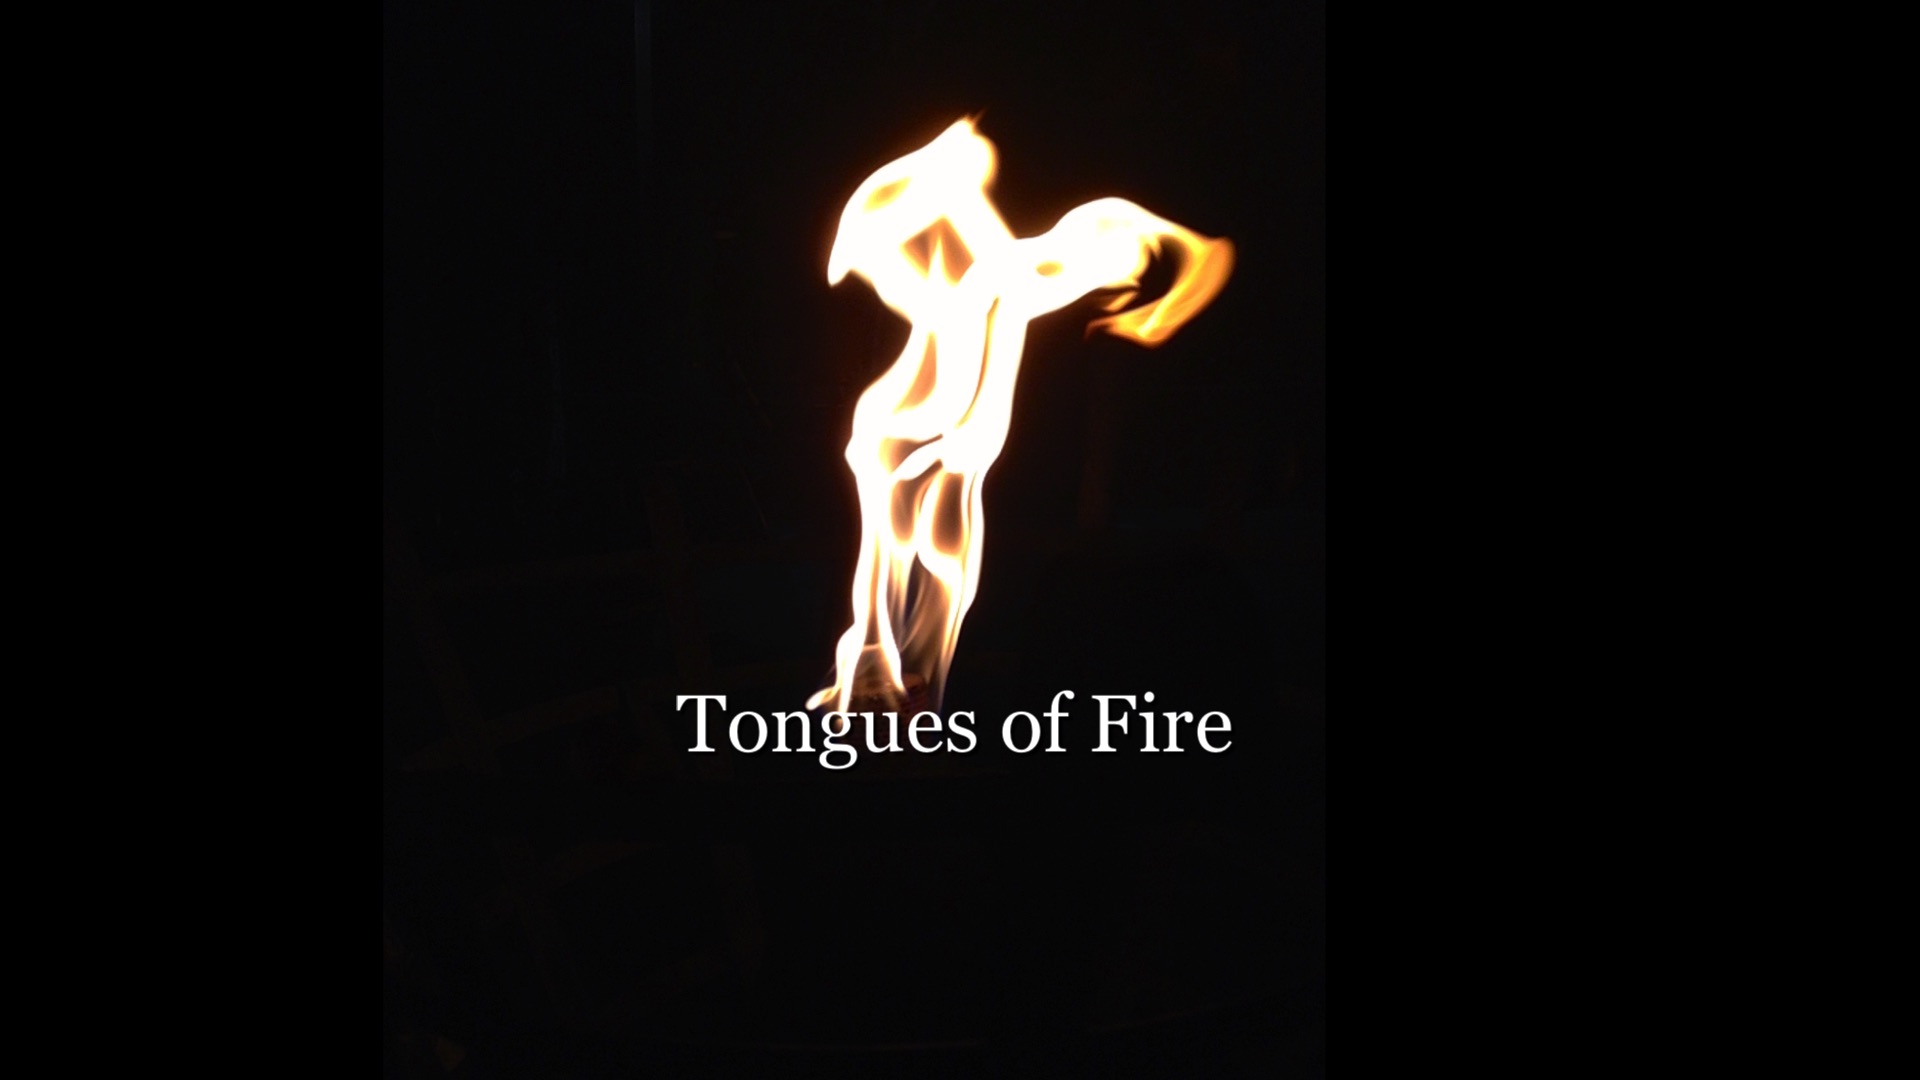 tongues-of-fire-hd1080p-m4v-image